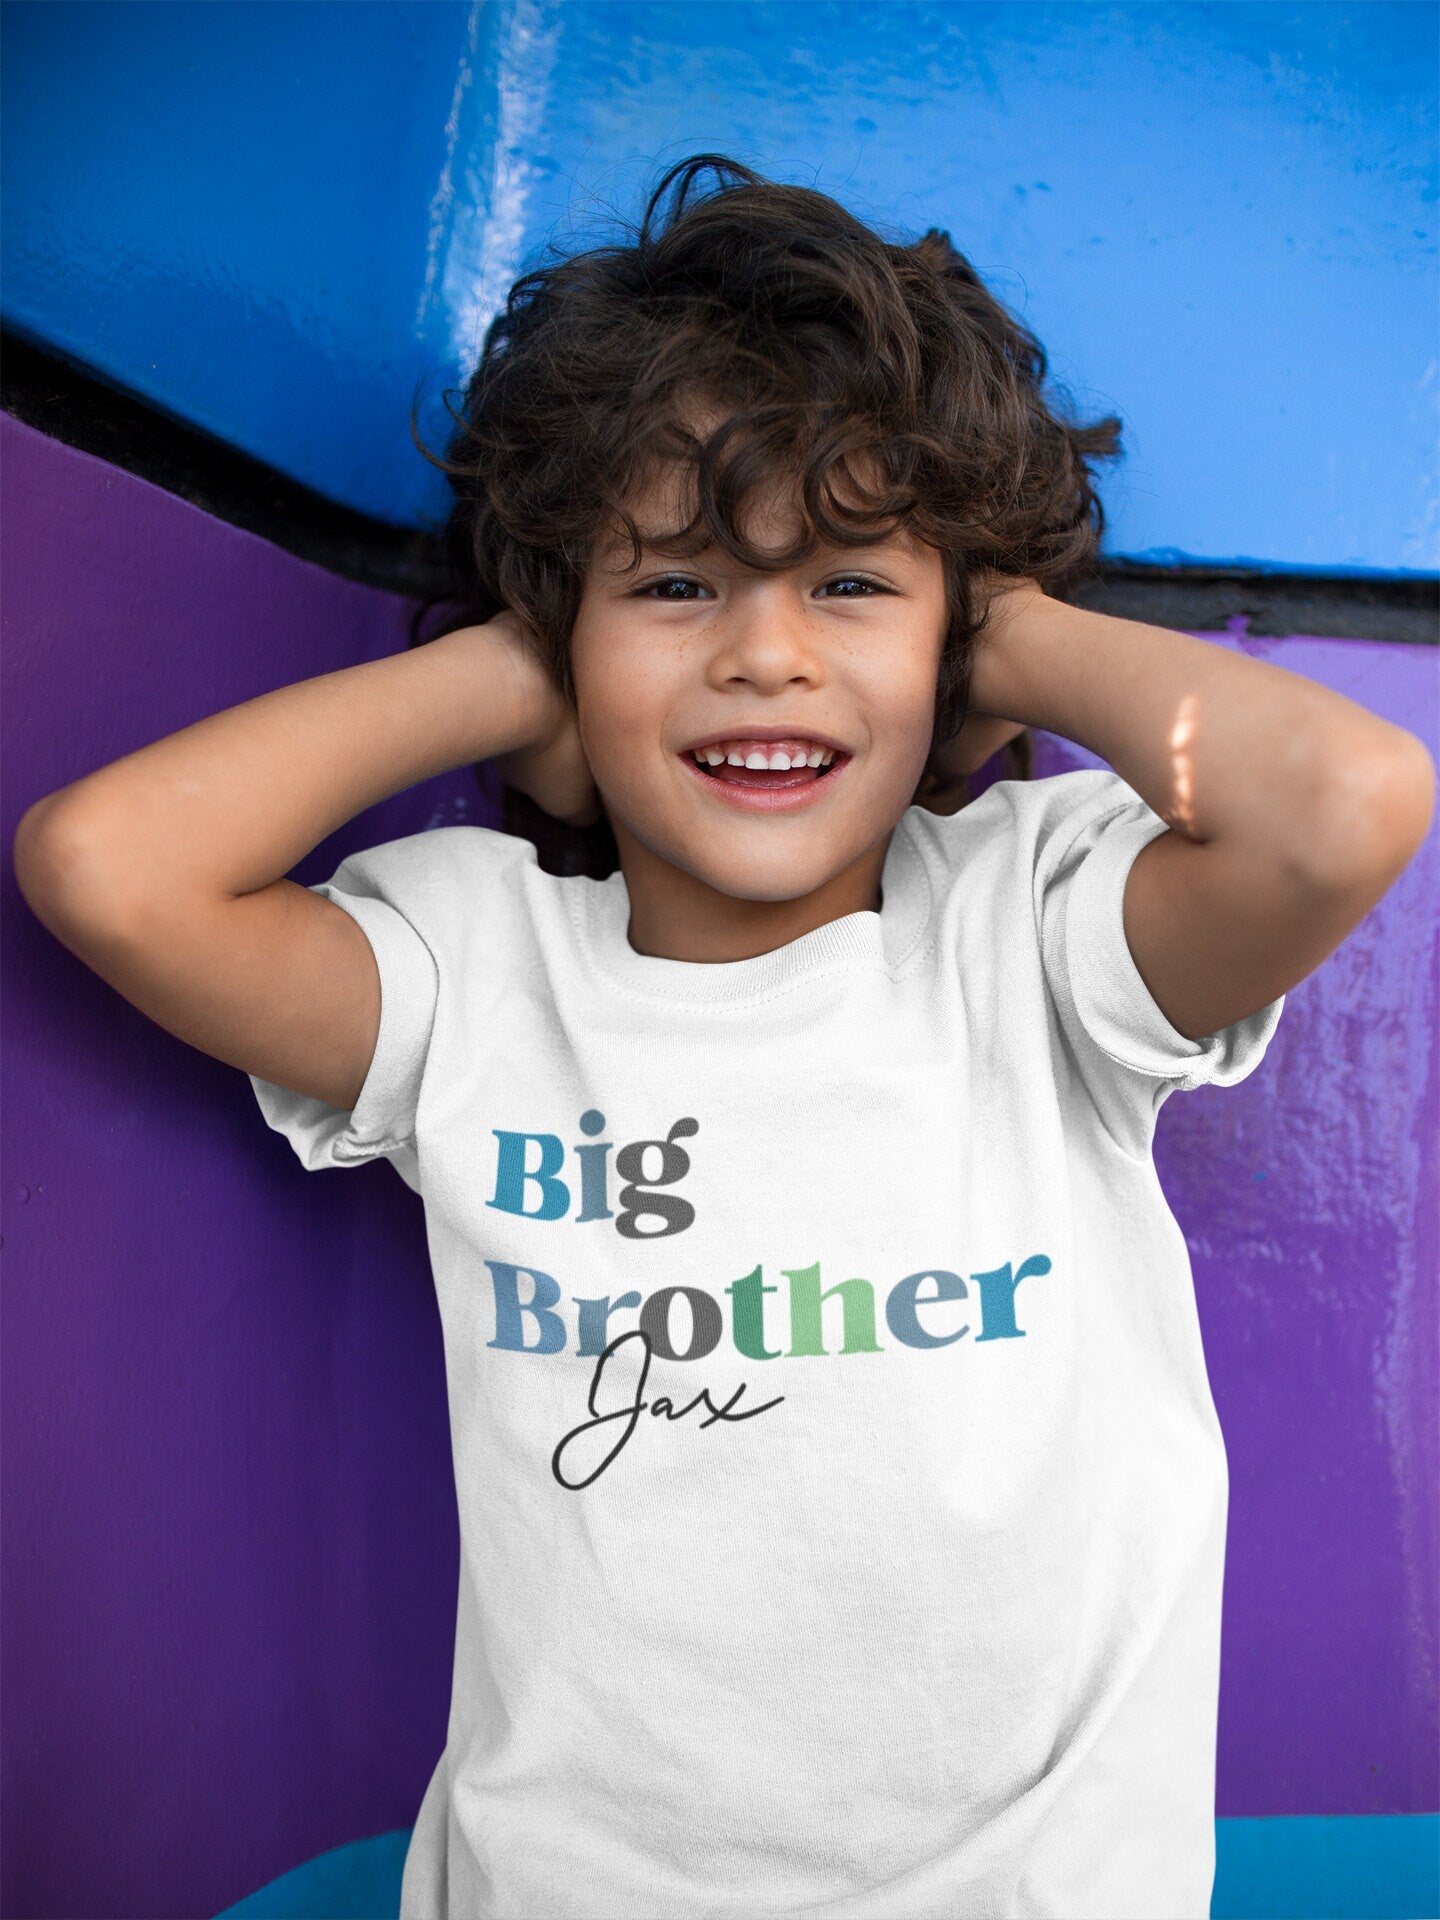 Personalised Big Brother Little Brother T-Shirt, Matching Sibling Outfits